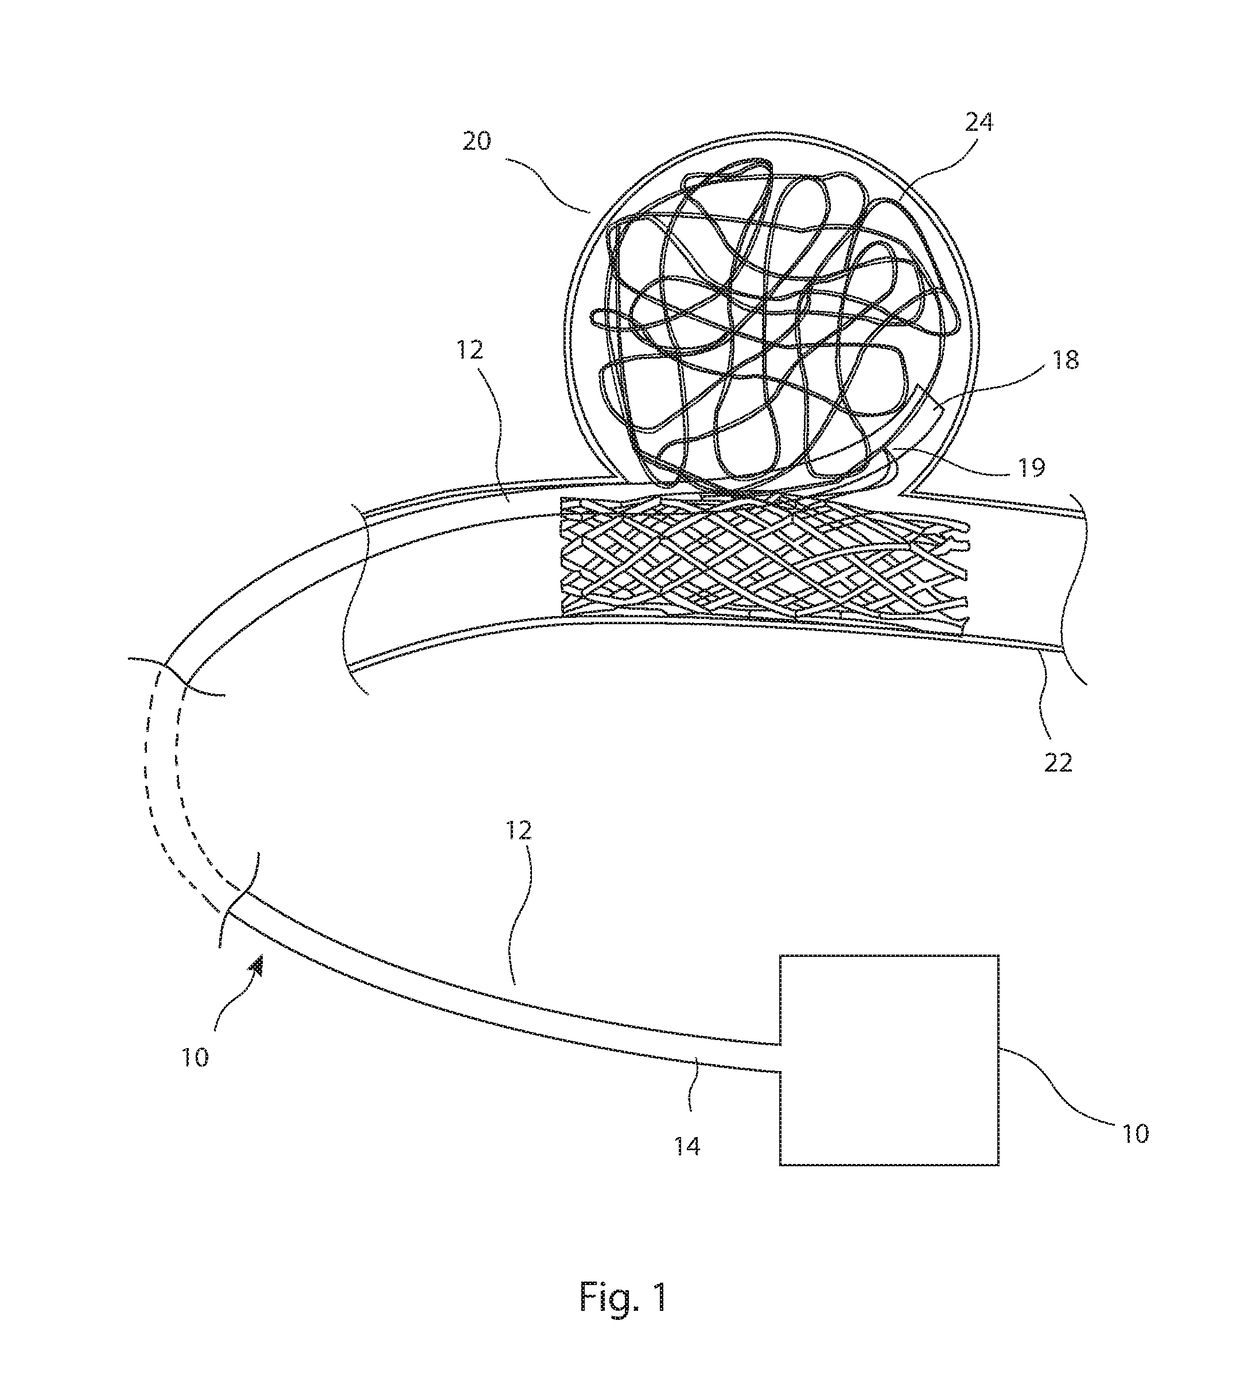 Apparatus for delivering filamentary material into a patient